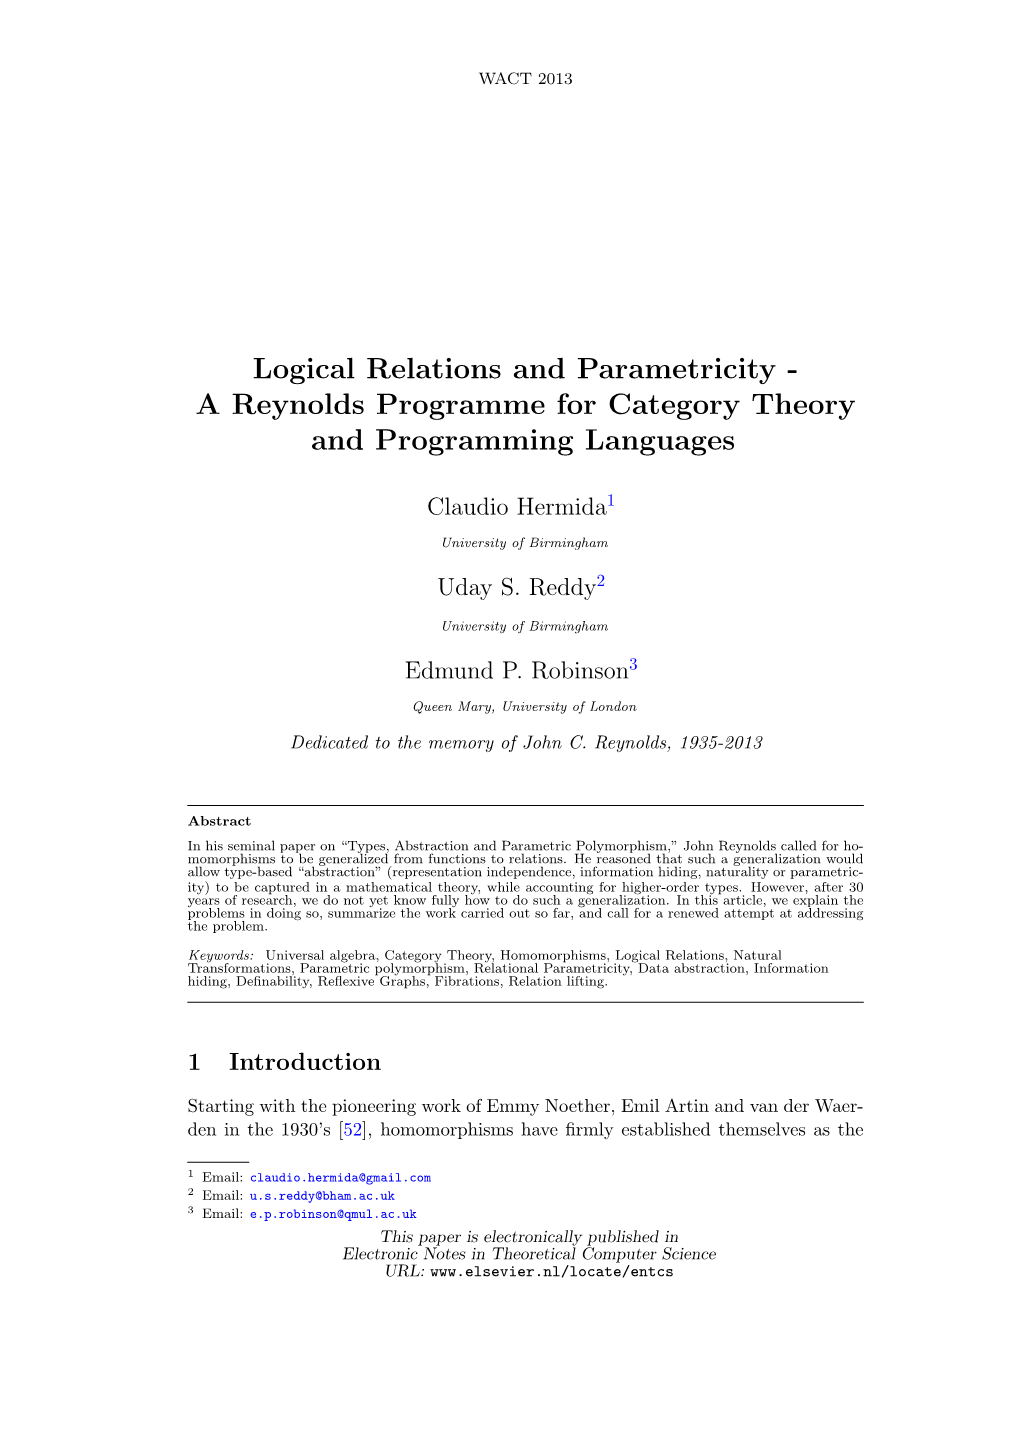 Logical Relations and Parametricity - a Reynolds Programme for Category Theory and Programming Languages